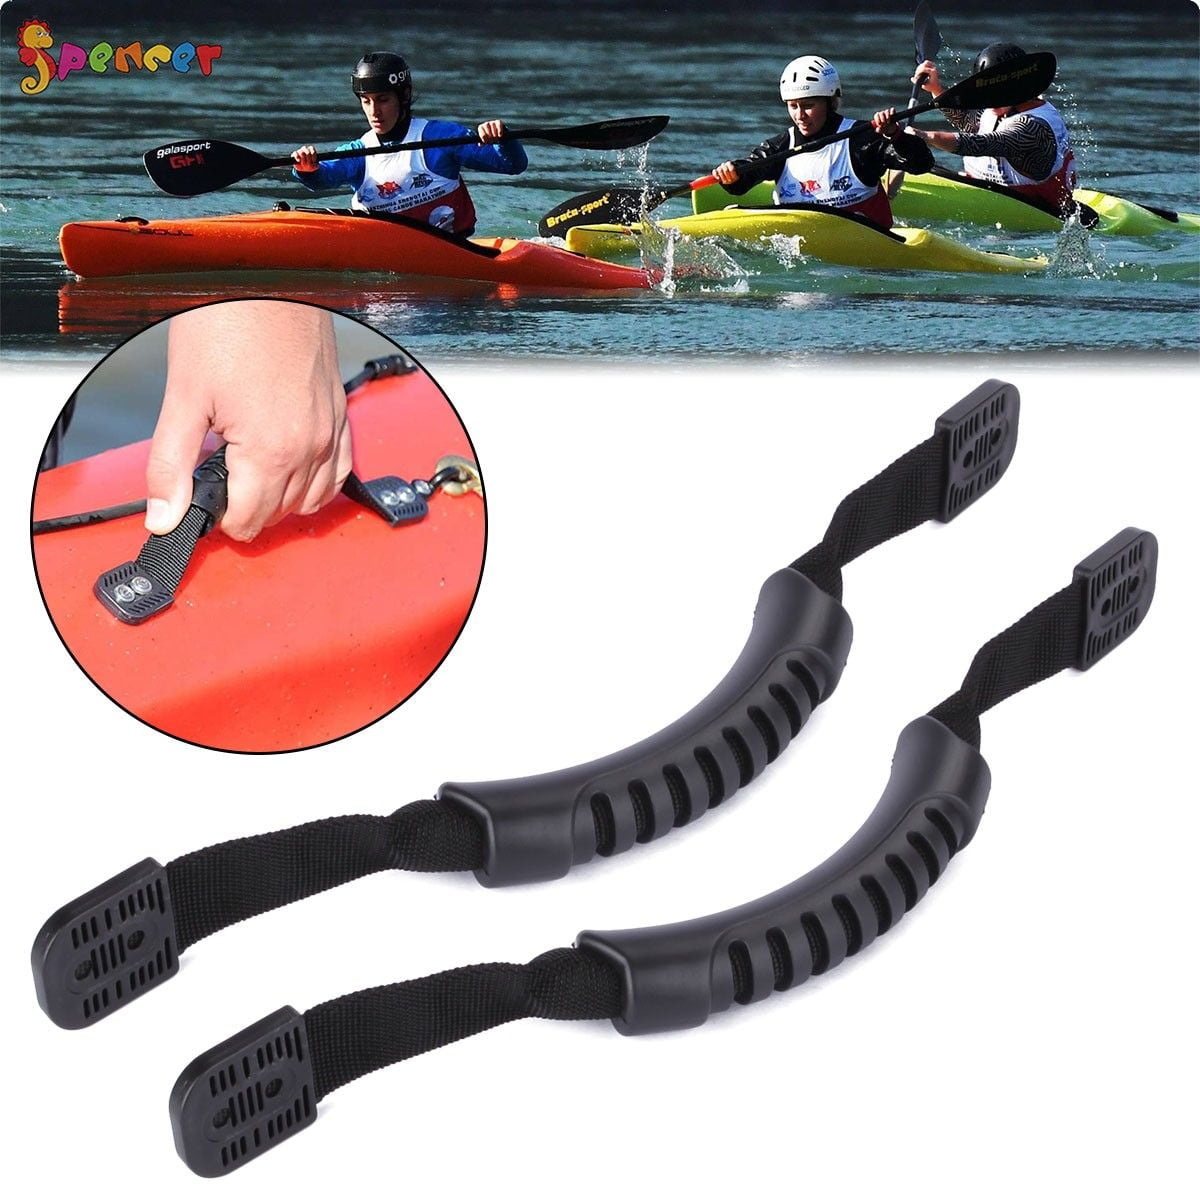 Kayak Canoe Boat Side Mount Handle With Bungee Cord Accessories Black 1 Pair New 